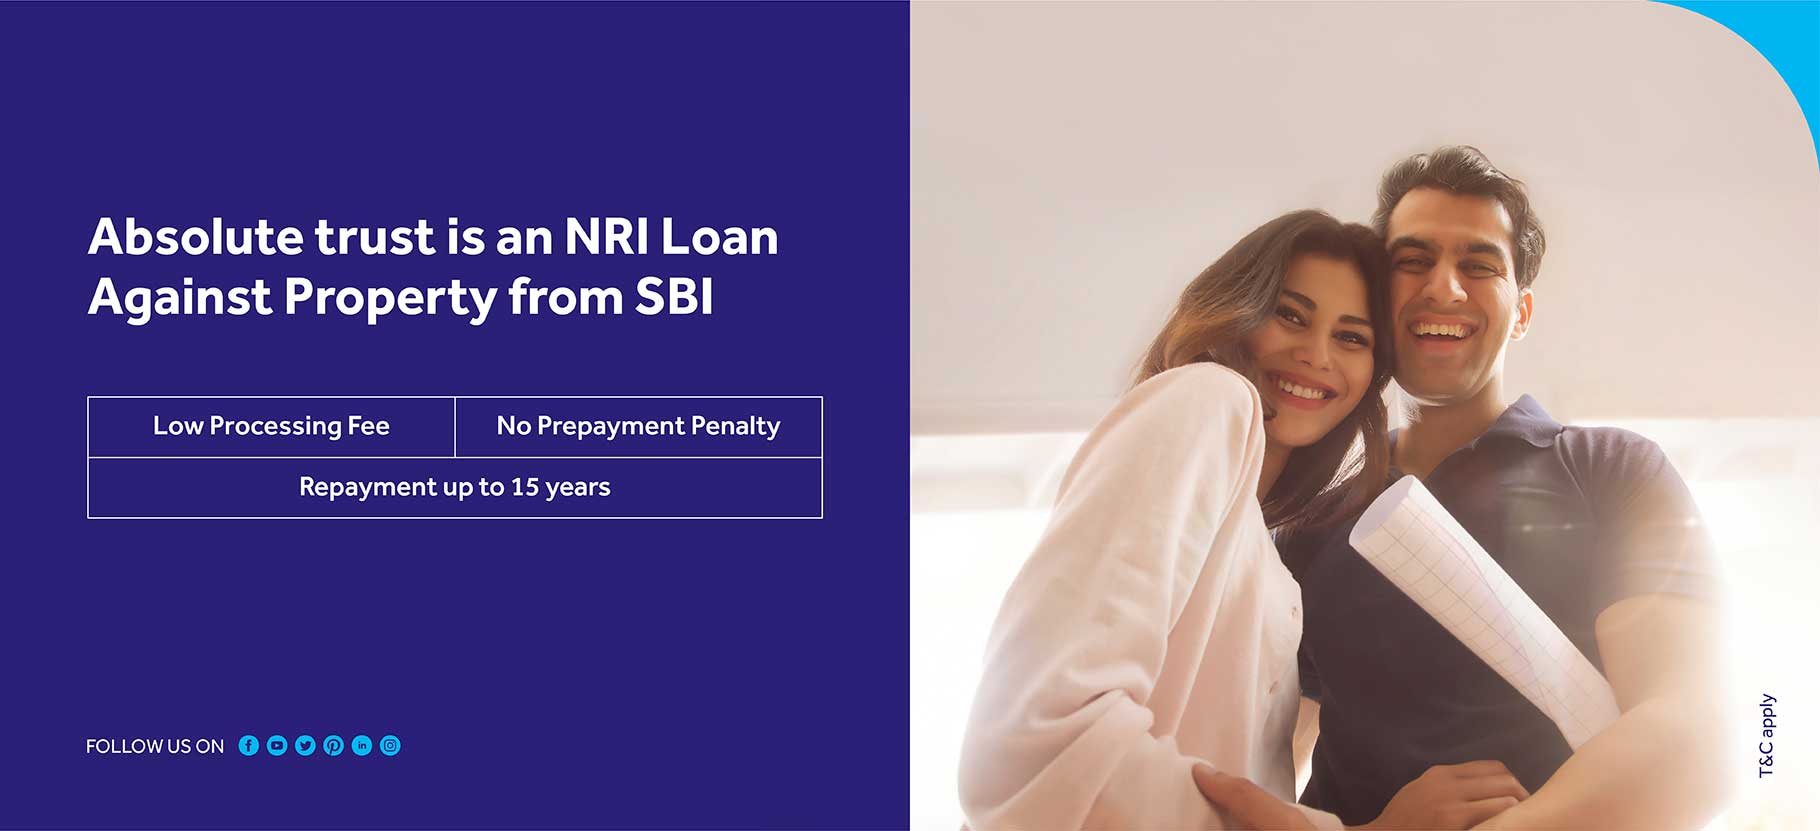 Absolute trust is an Nri loan againest property from sbi